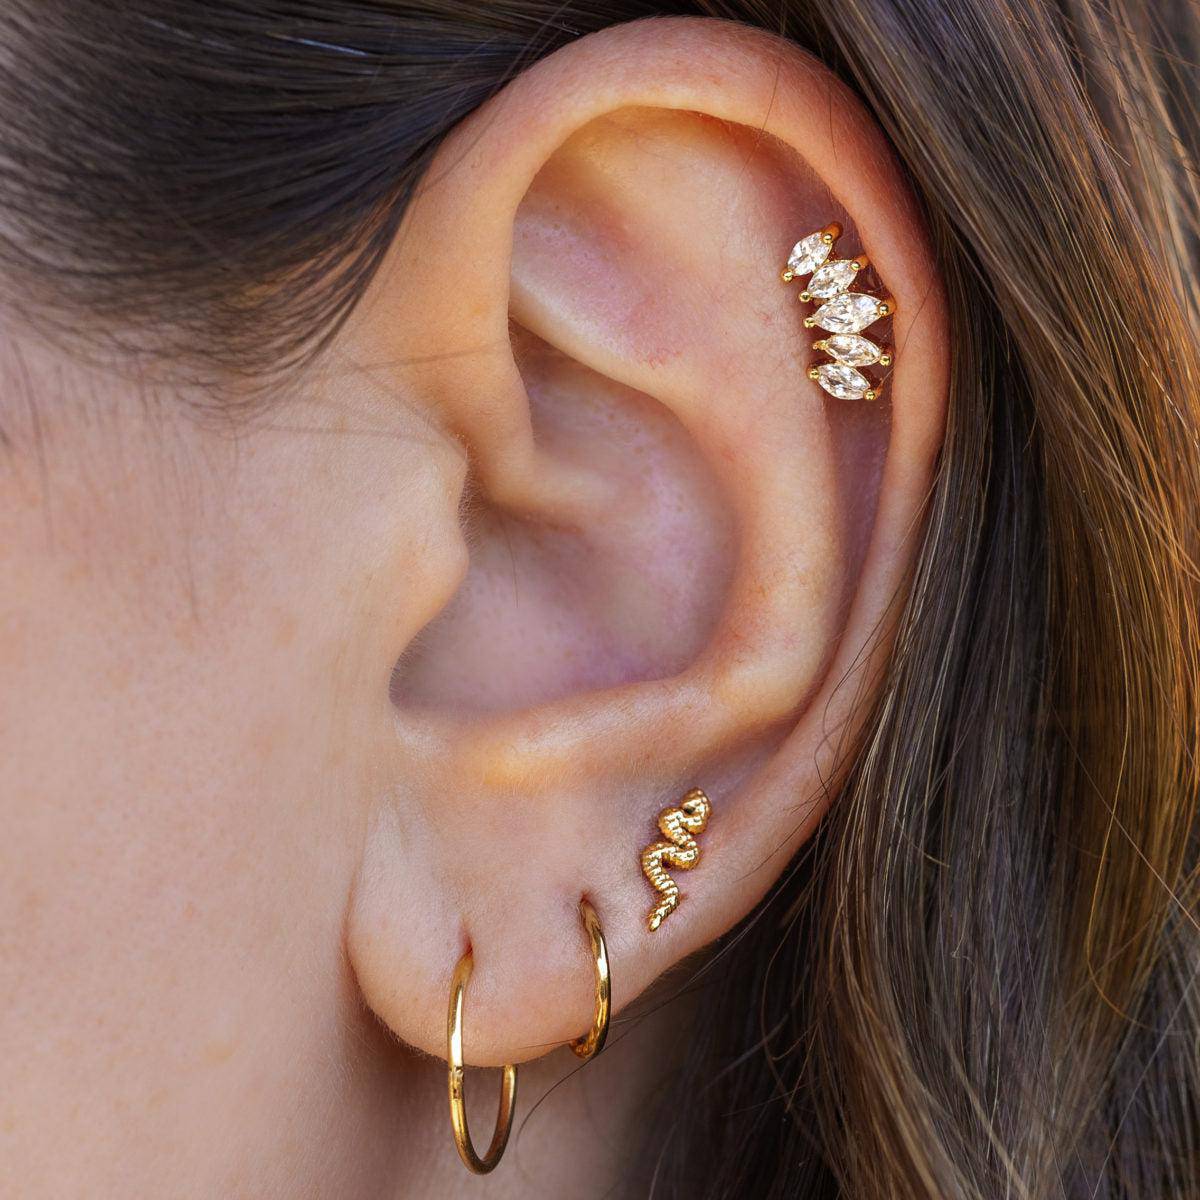 Cartilage Piercing Jewellery Online and Instore at SkinKandy